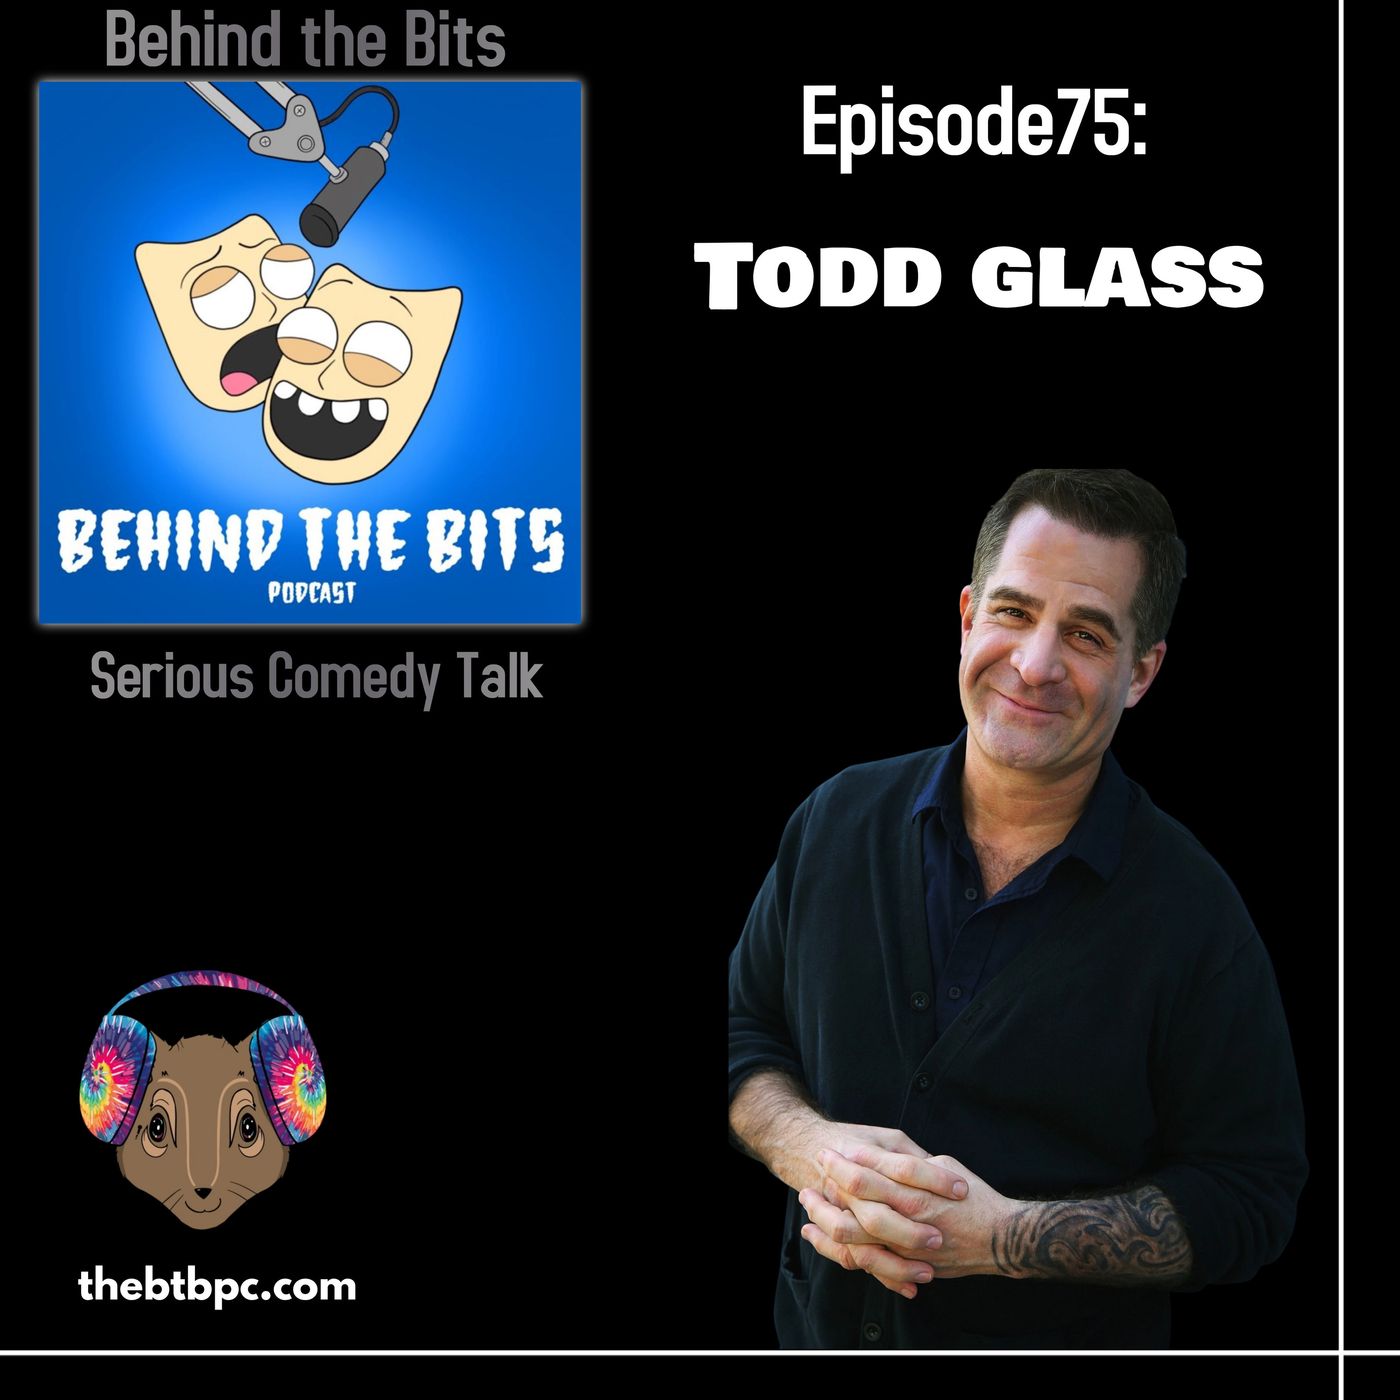 Episode 75: Todd Glass